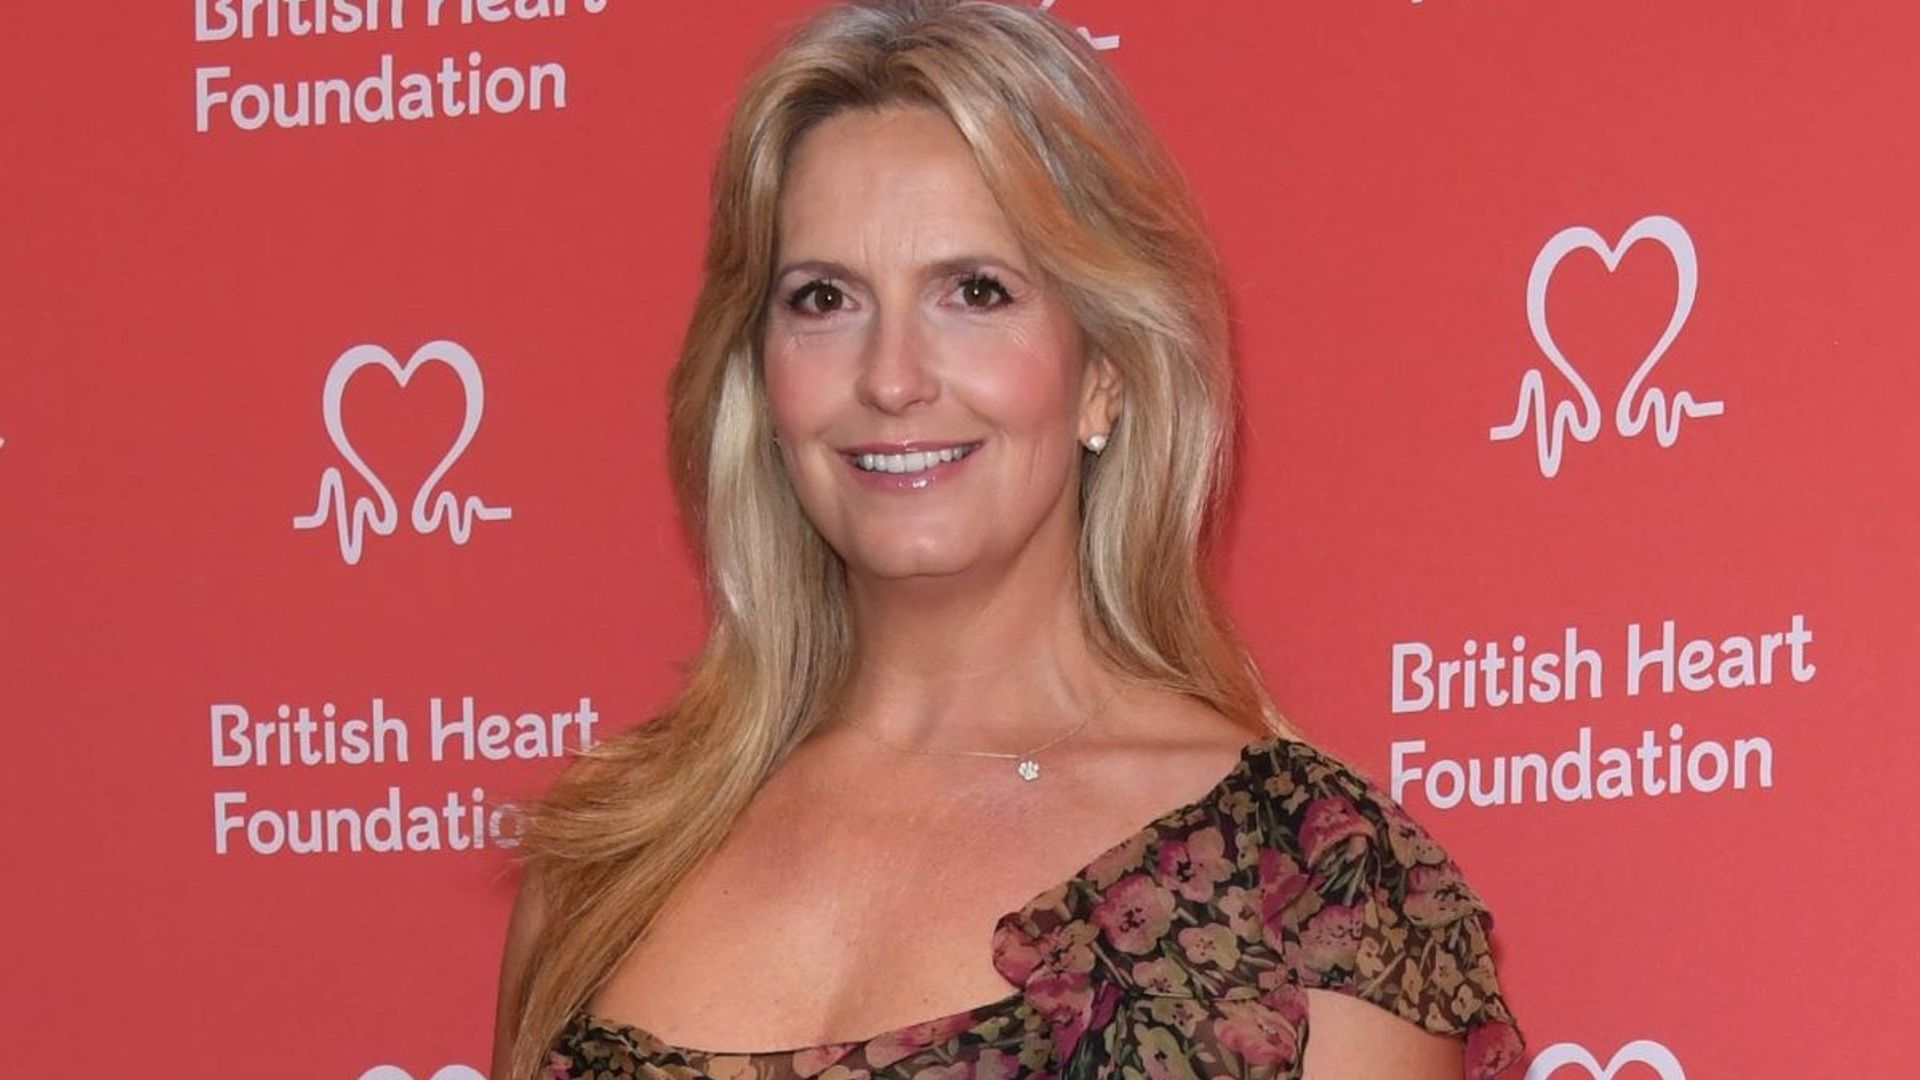 Penny Lancaster reveals 'secret' as she shows off stunning hair transformation